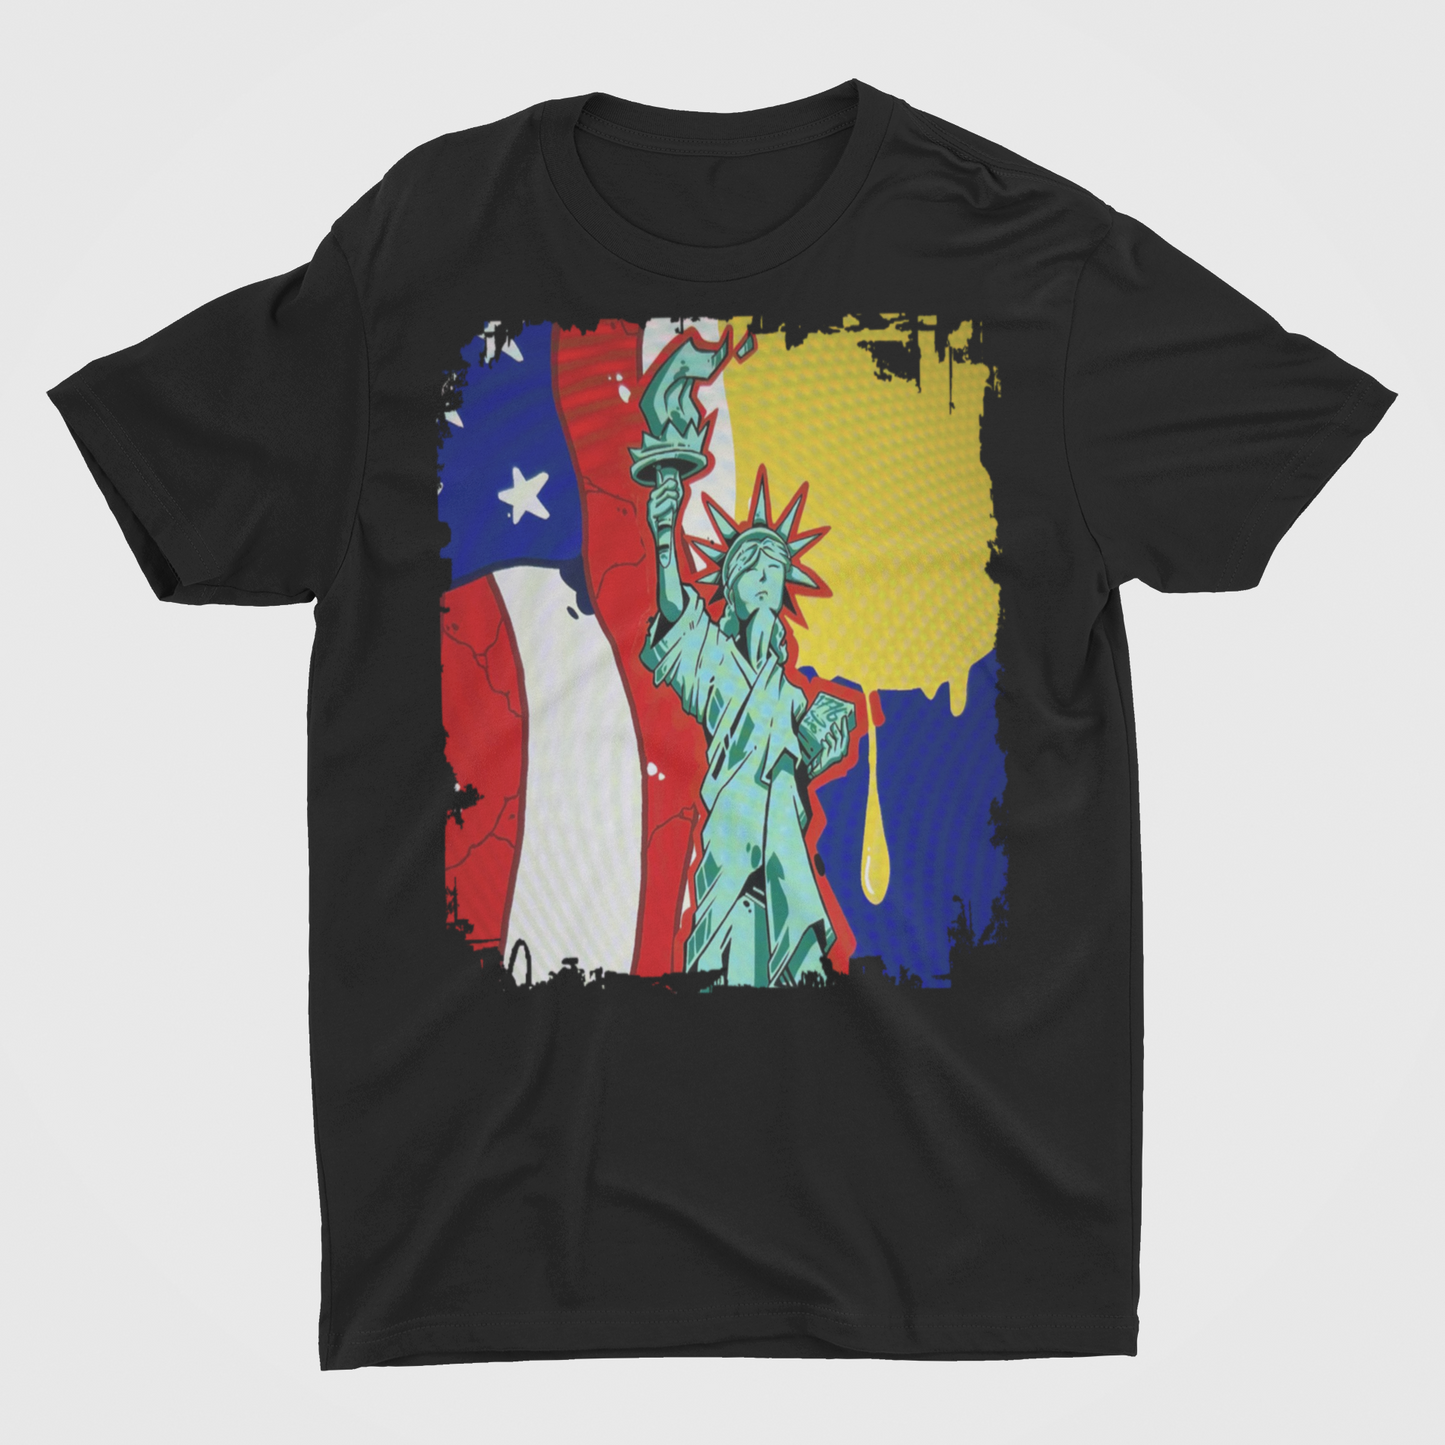 NYC Colombian-American Pride T-Shirt